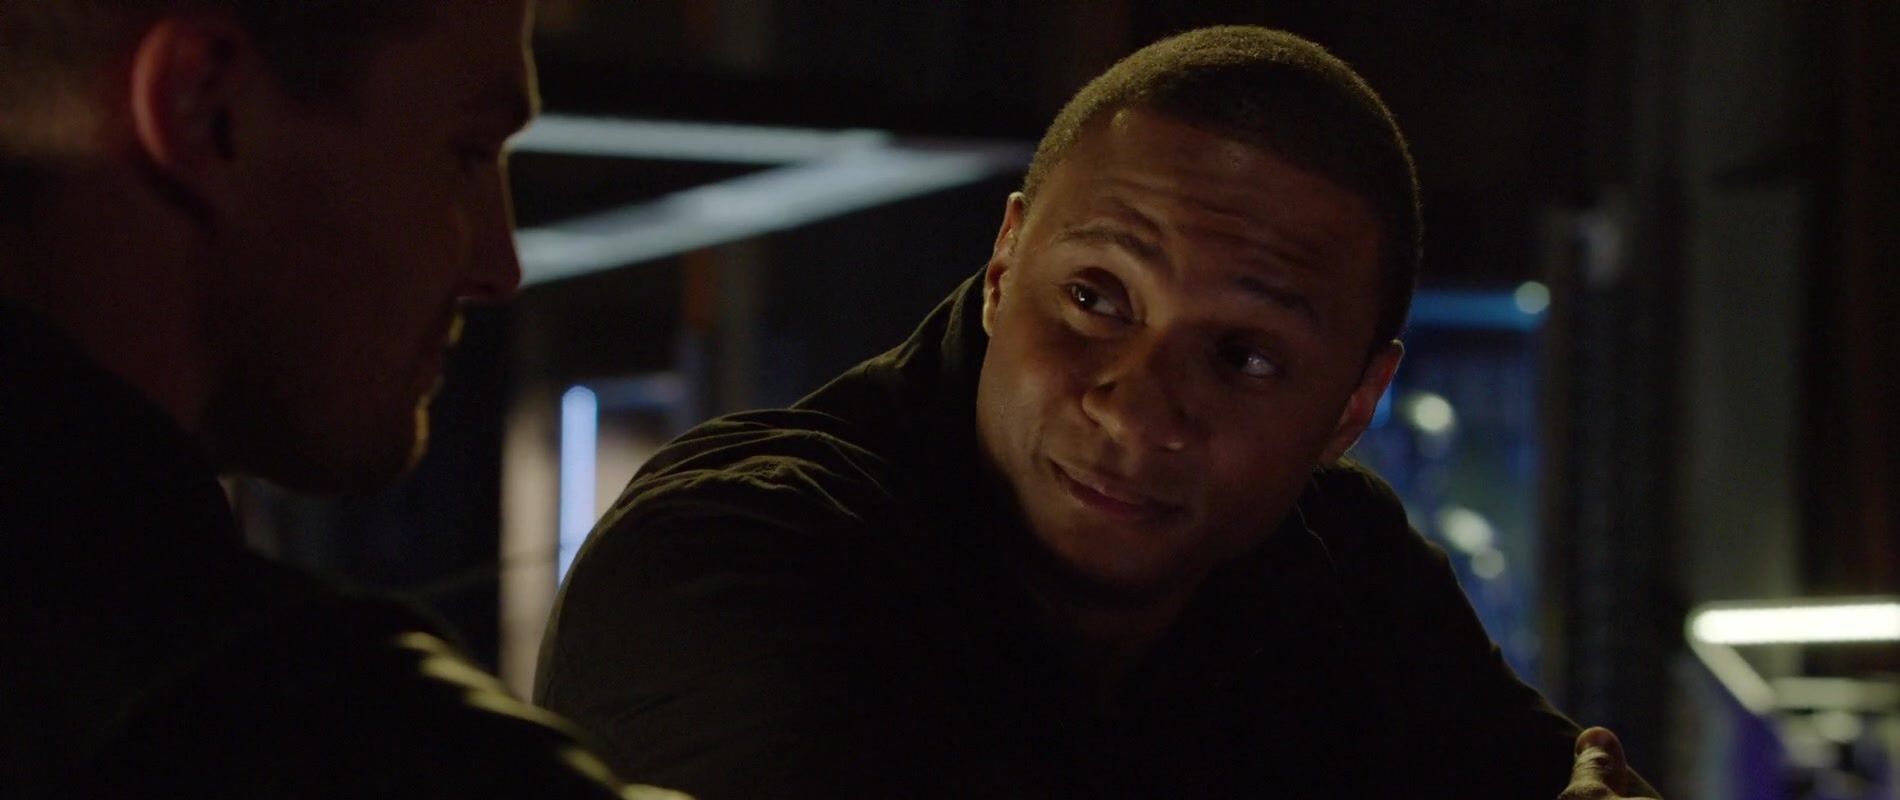 John Diggle listening to Oliver Queen in Arrow